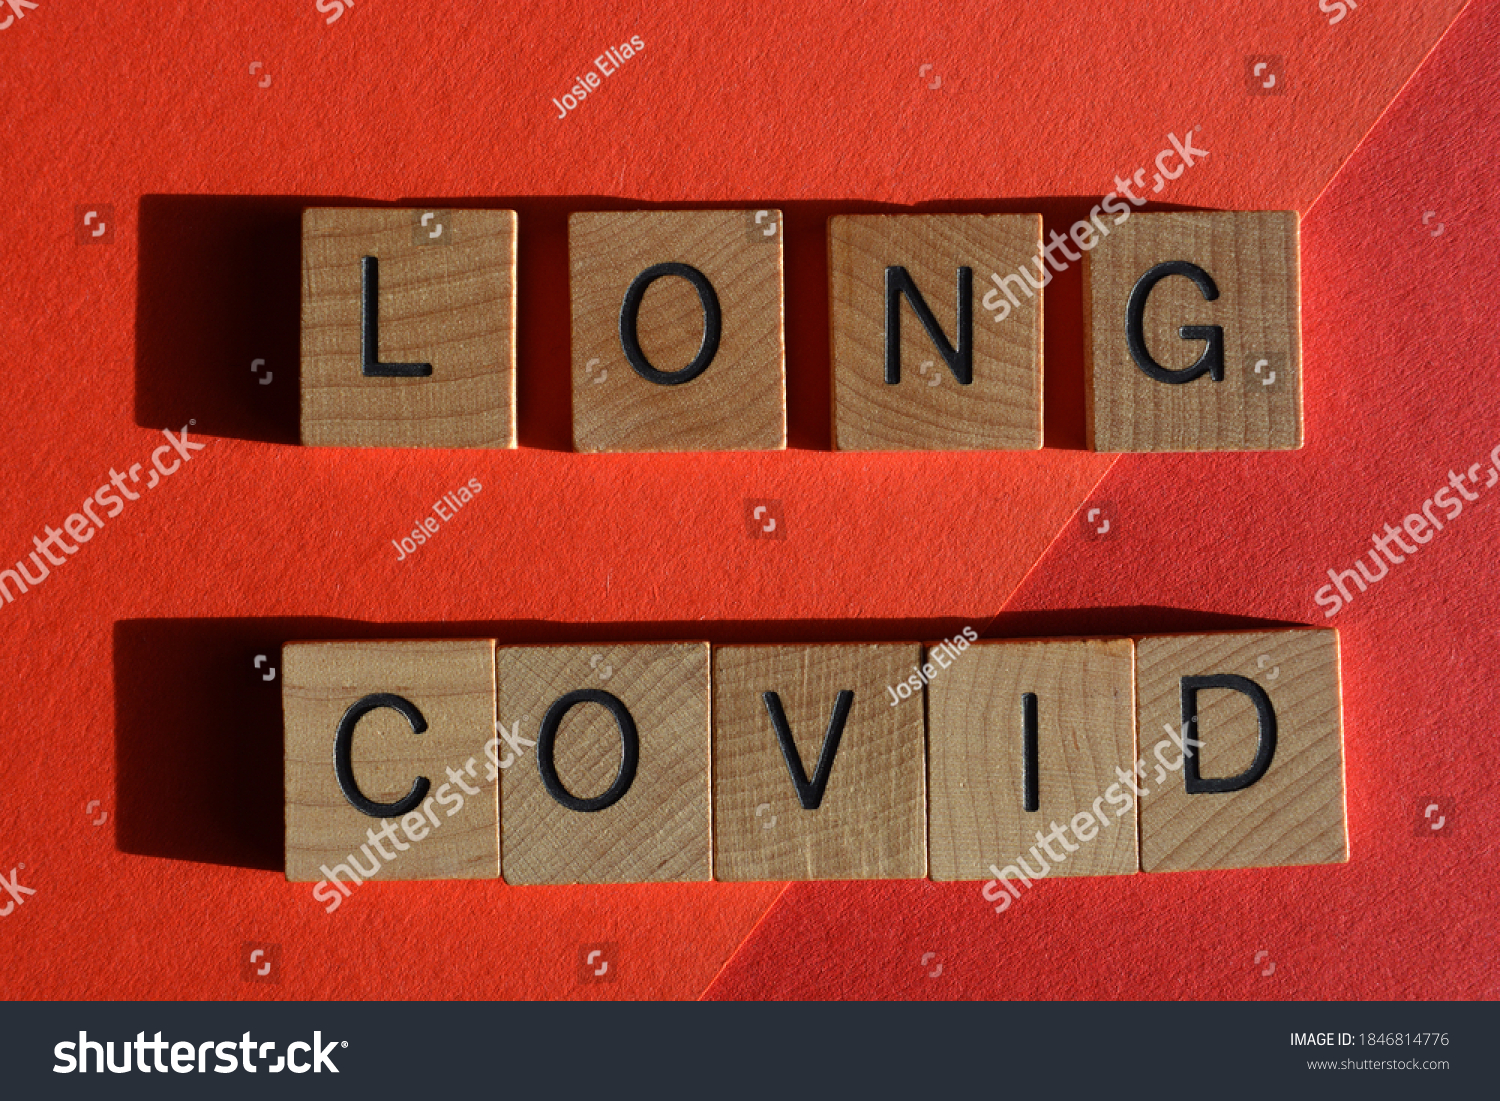 Long Covid, a condition some people experience after Covid-19, including recurring symptoms affecting the respiratory system and heart #1846814776